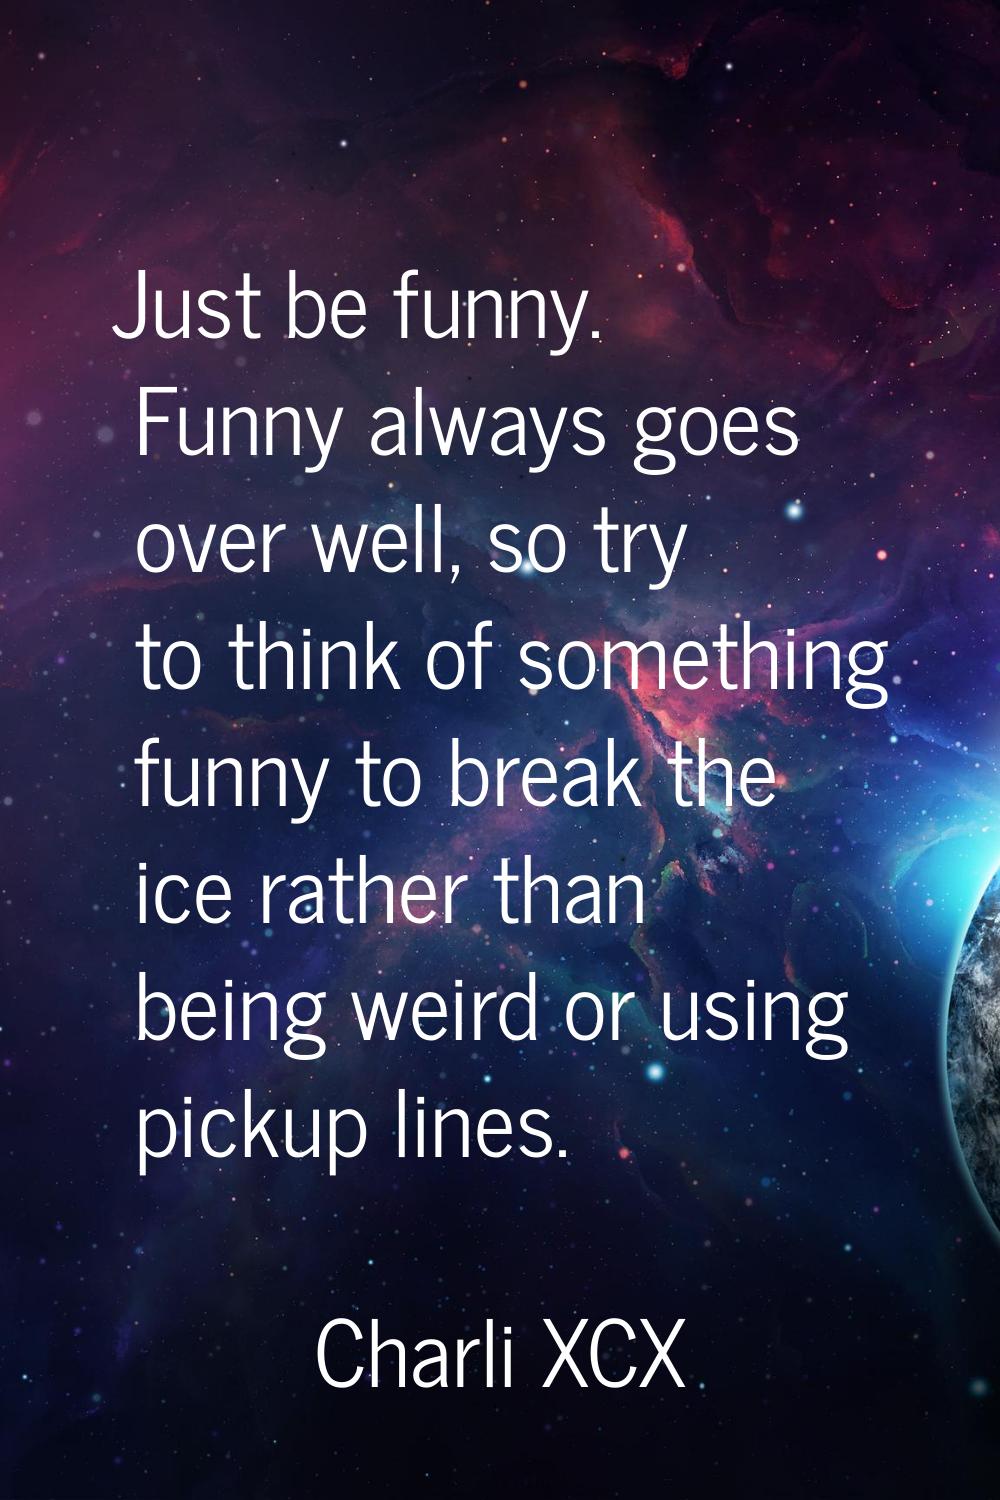 Just be funny. Funny always goes over well, so try to think of something funny to break the ice rat